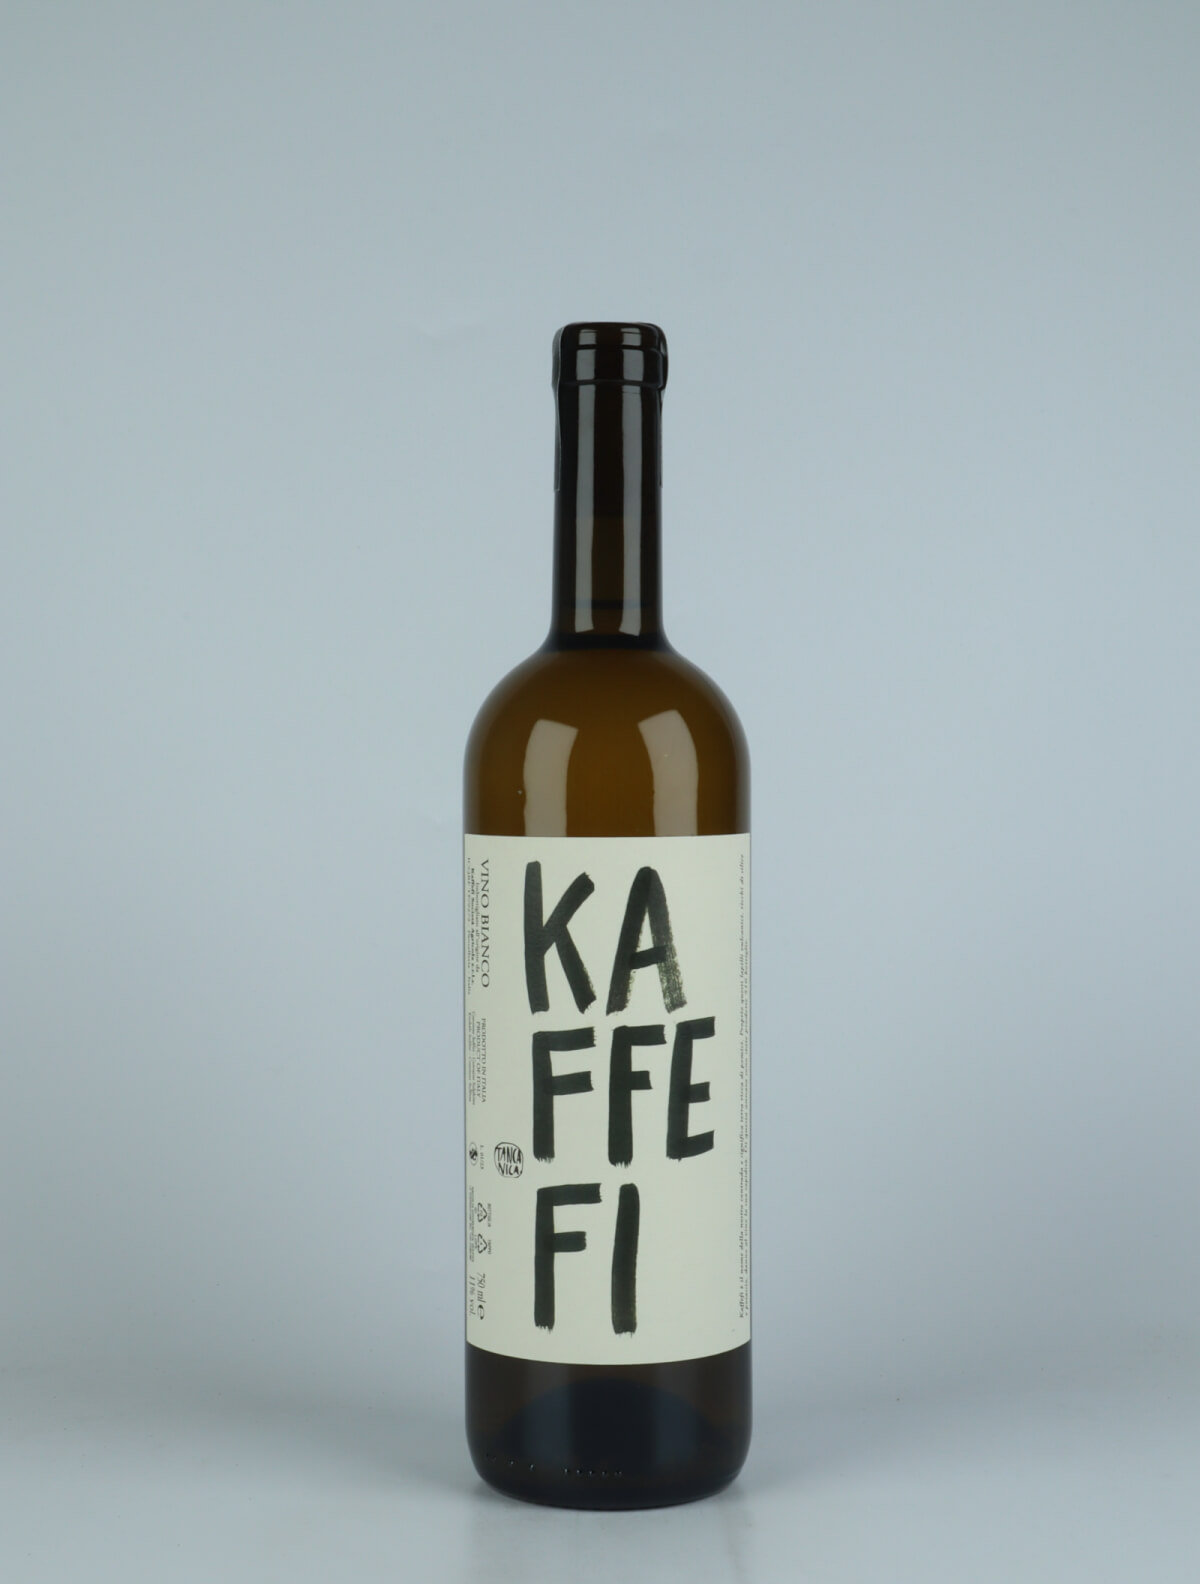 A bottle 2022 Kaffefi White wine from Tanca Nica, Sicily in Italy